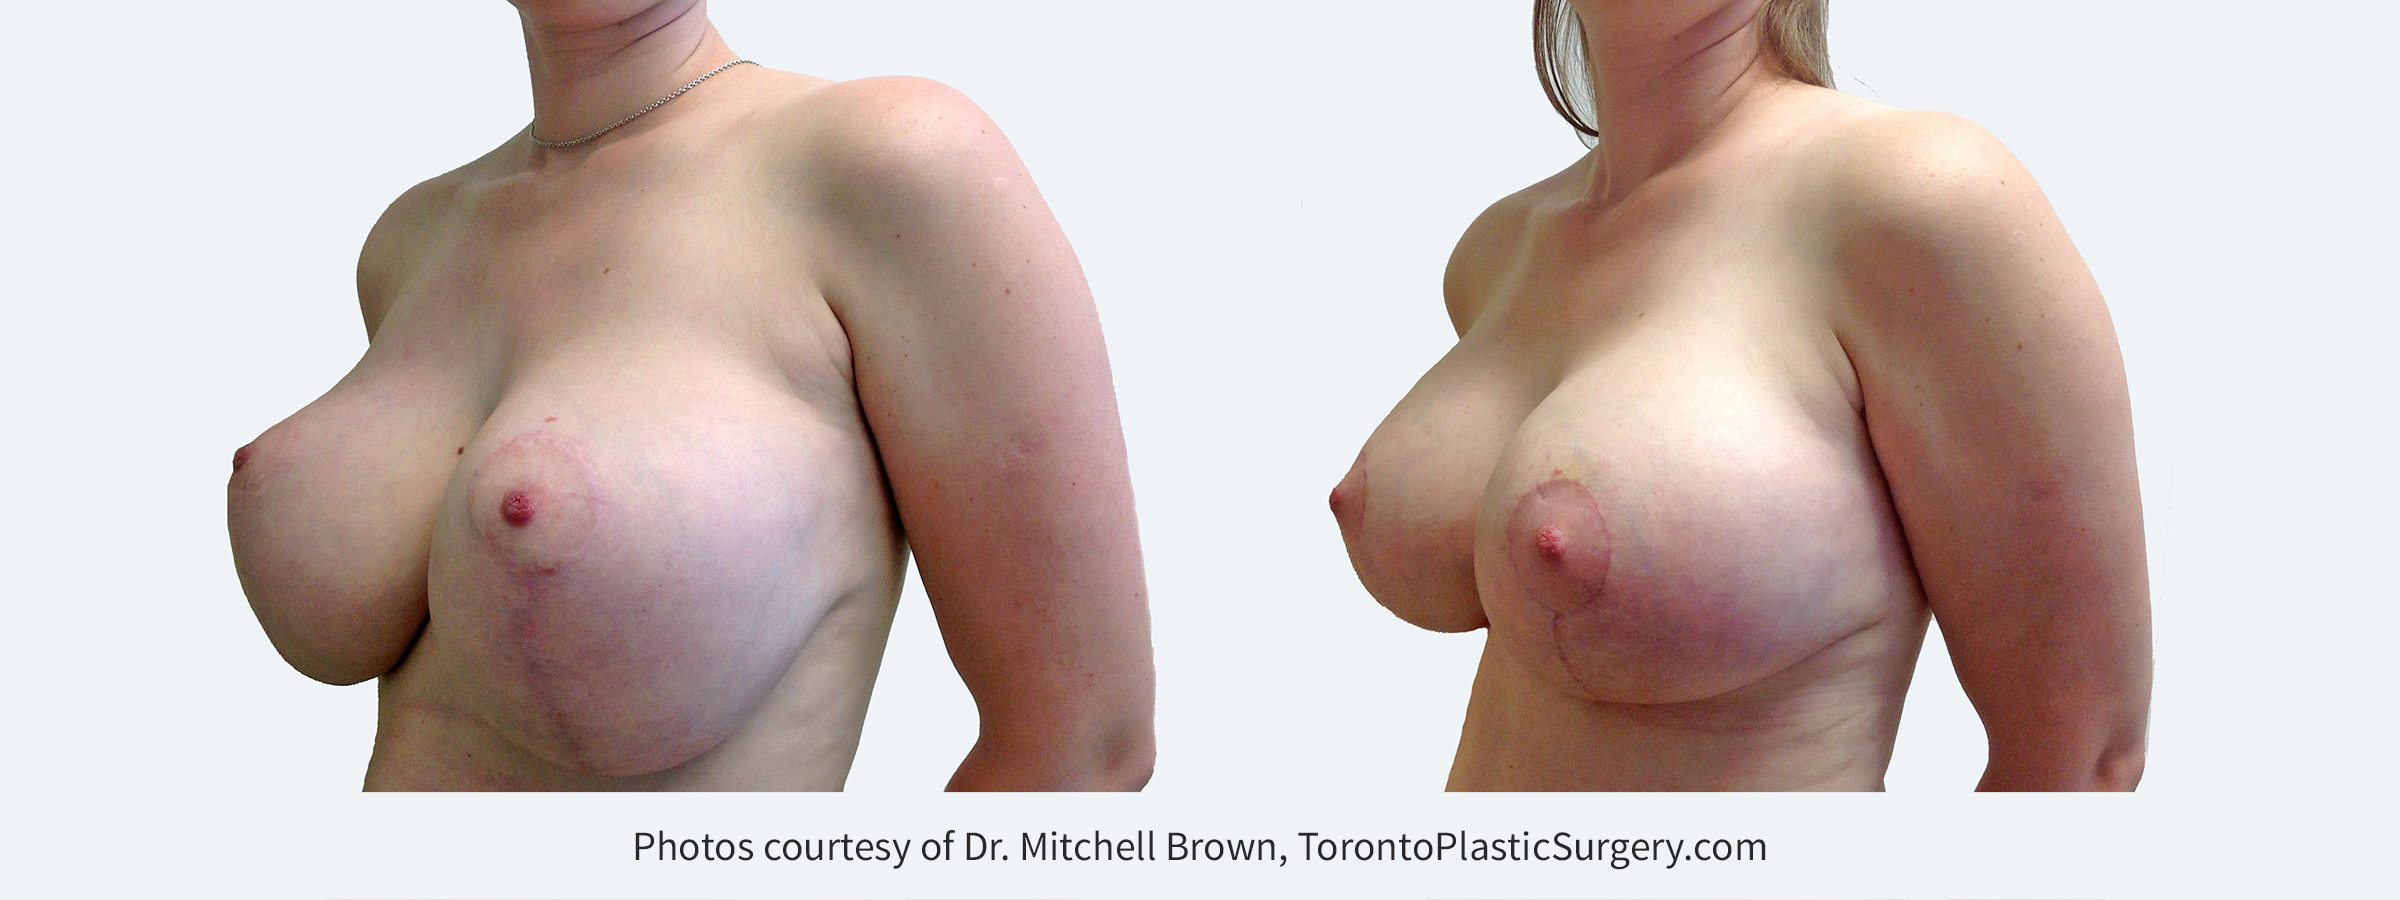 Large implants with inadequate breast lift. This has resulted in stretching of the breast skin and nipples placed too high. Correction with small downsizing of implants and revision of the breast lift including internal support for the implant position. Before and 4 months after